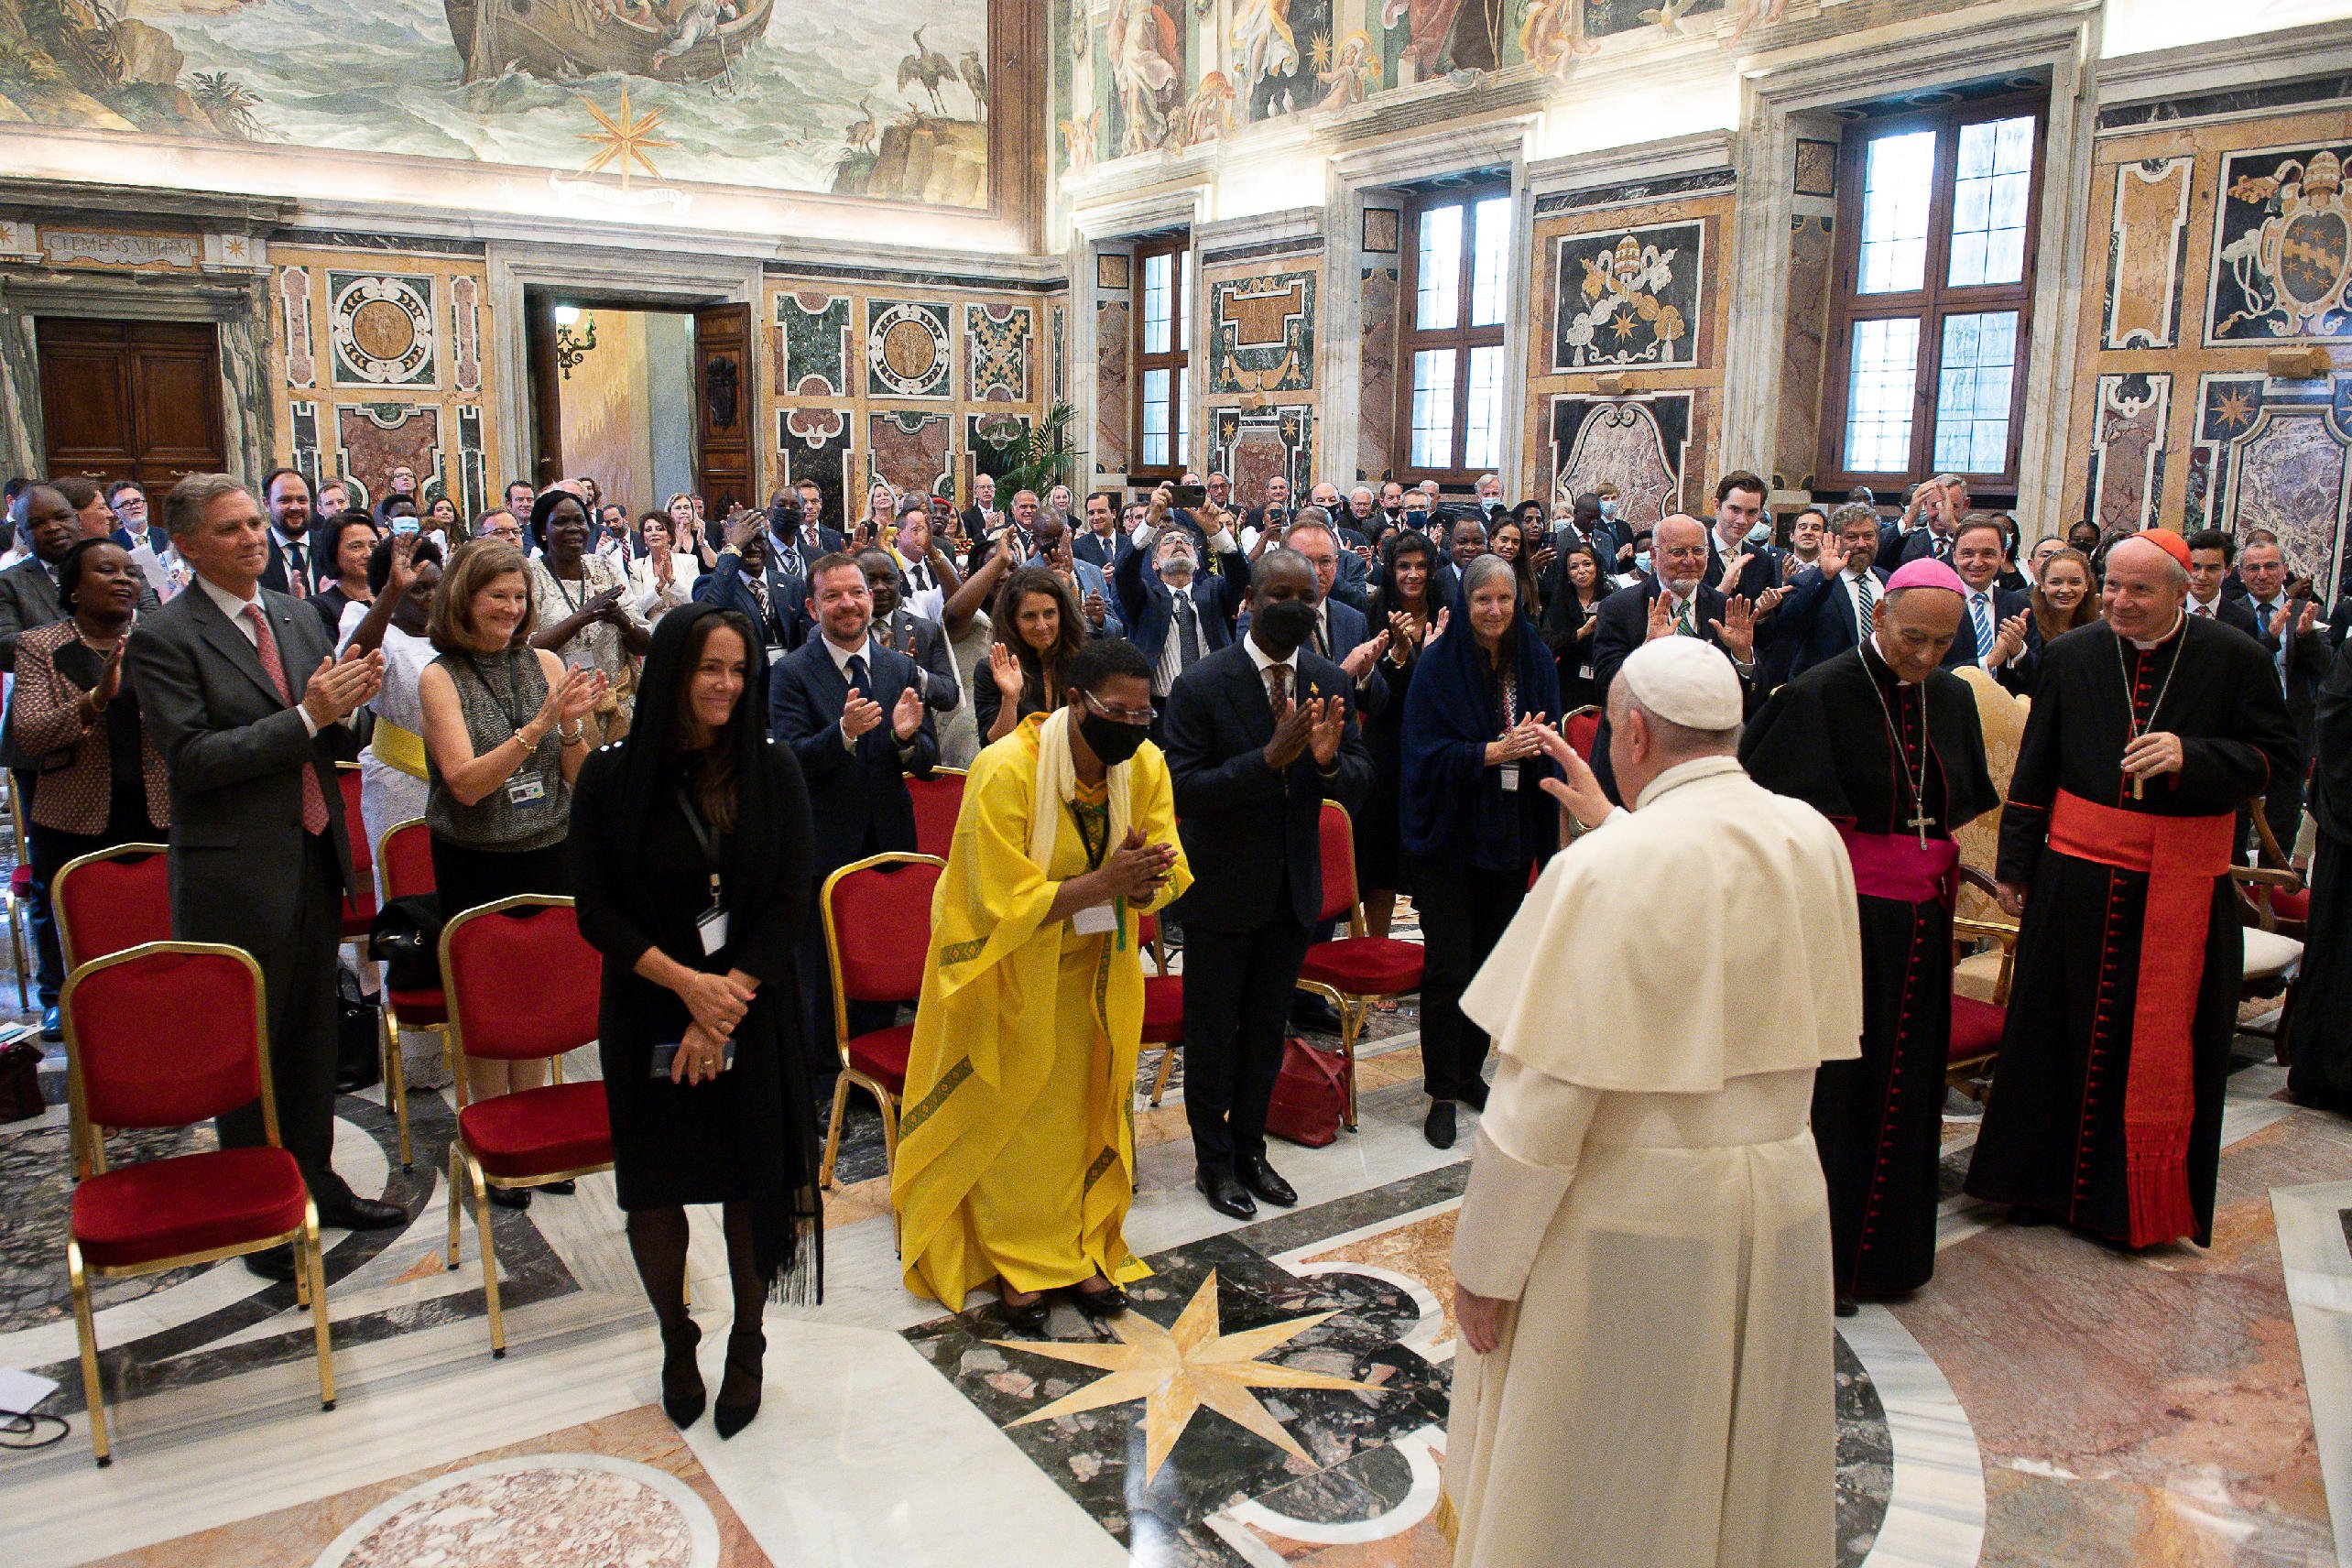 Pope Francis greets members of the International Catholic Legislators Network during an audience at the Vatican Aug. 27, 2021. The pope spoke to Catholic and Christian legislators about the need to regulate and develop sound policies regarding today's dig